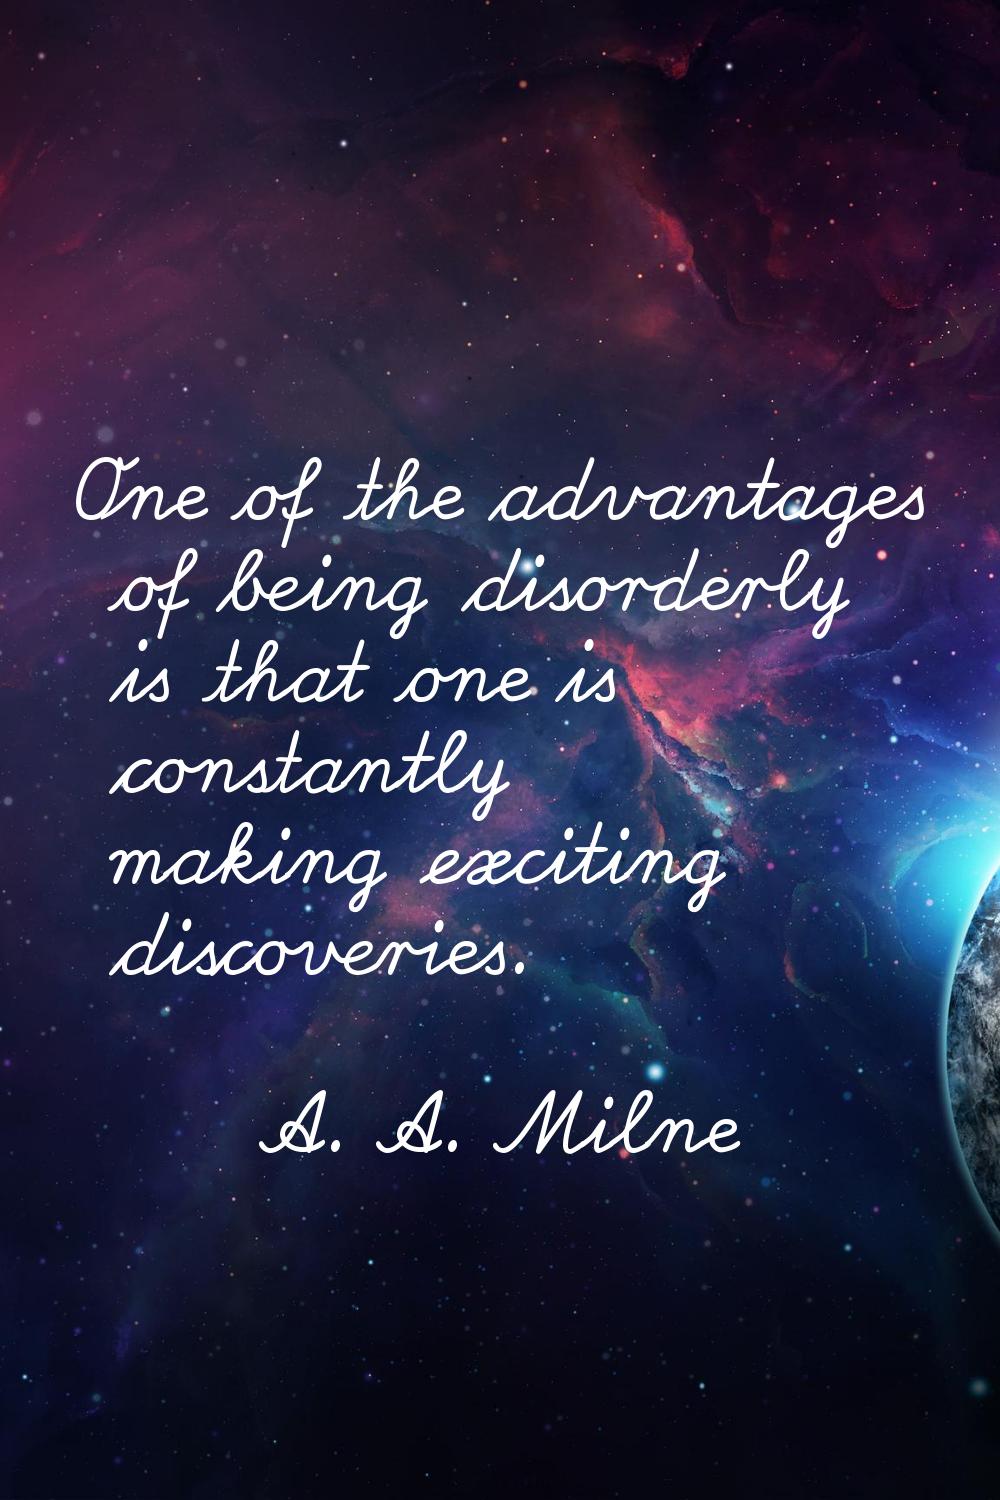 One of the advantages of being disorderly is that one is constantly making exciting discoveries.